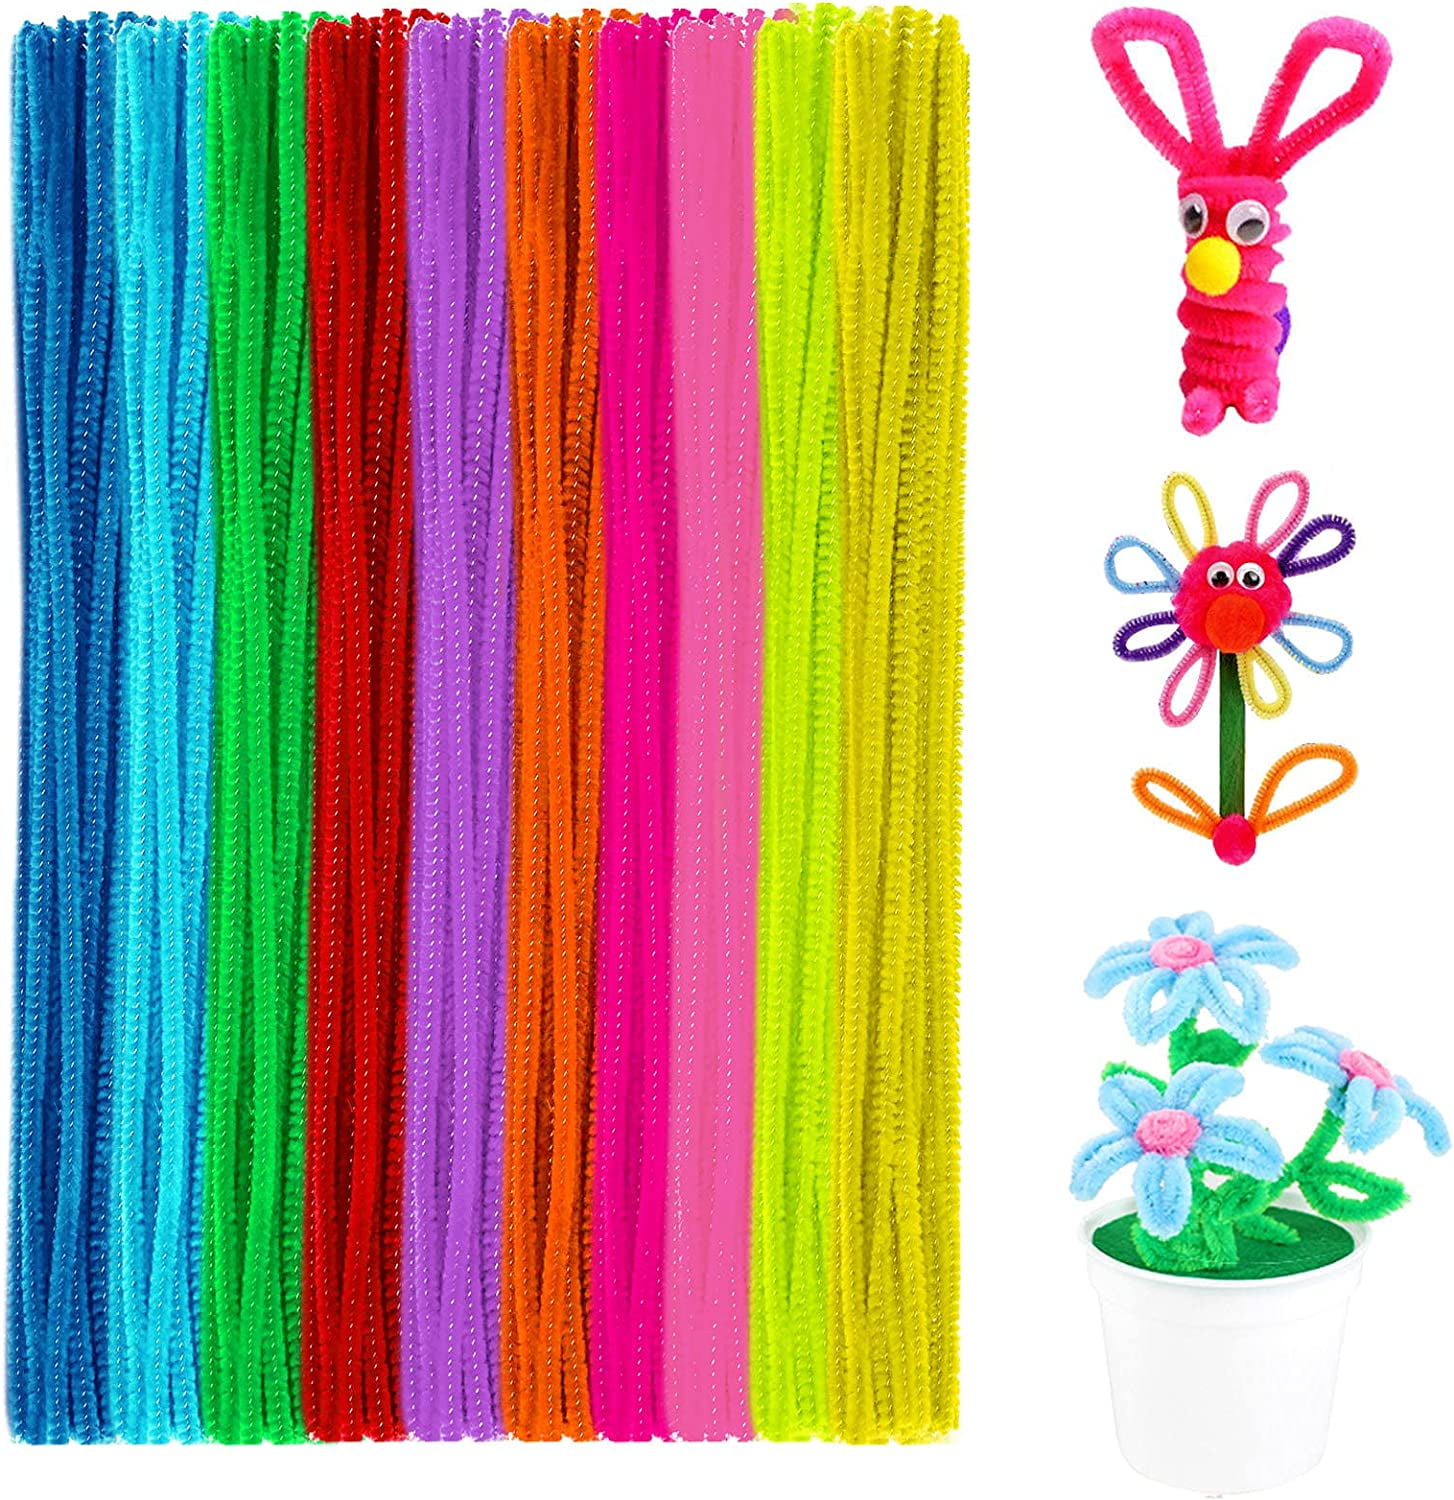 100 Pieces 7mm x 12 Inch Pipe Cleaners, Thick Fuzzy White Chenille Stems  for Craft Supplies Kids DIY Art Decorations 